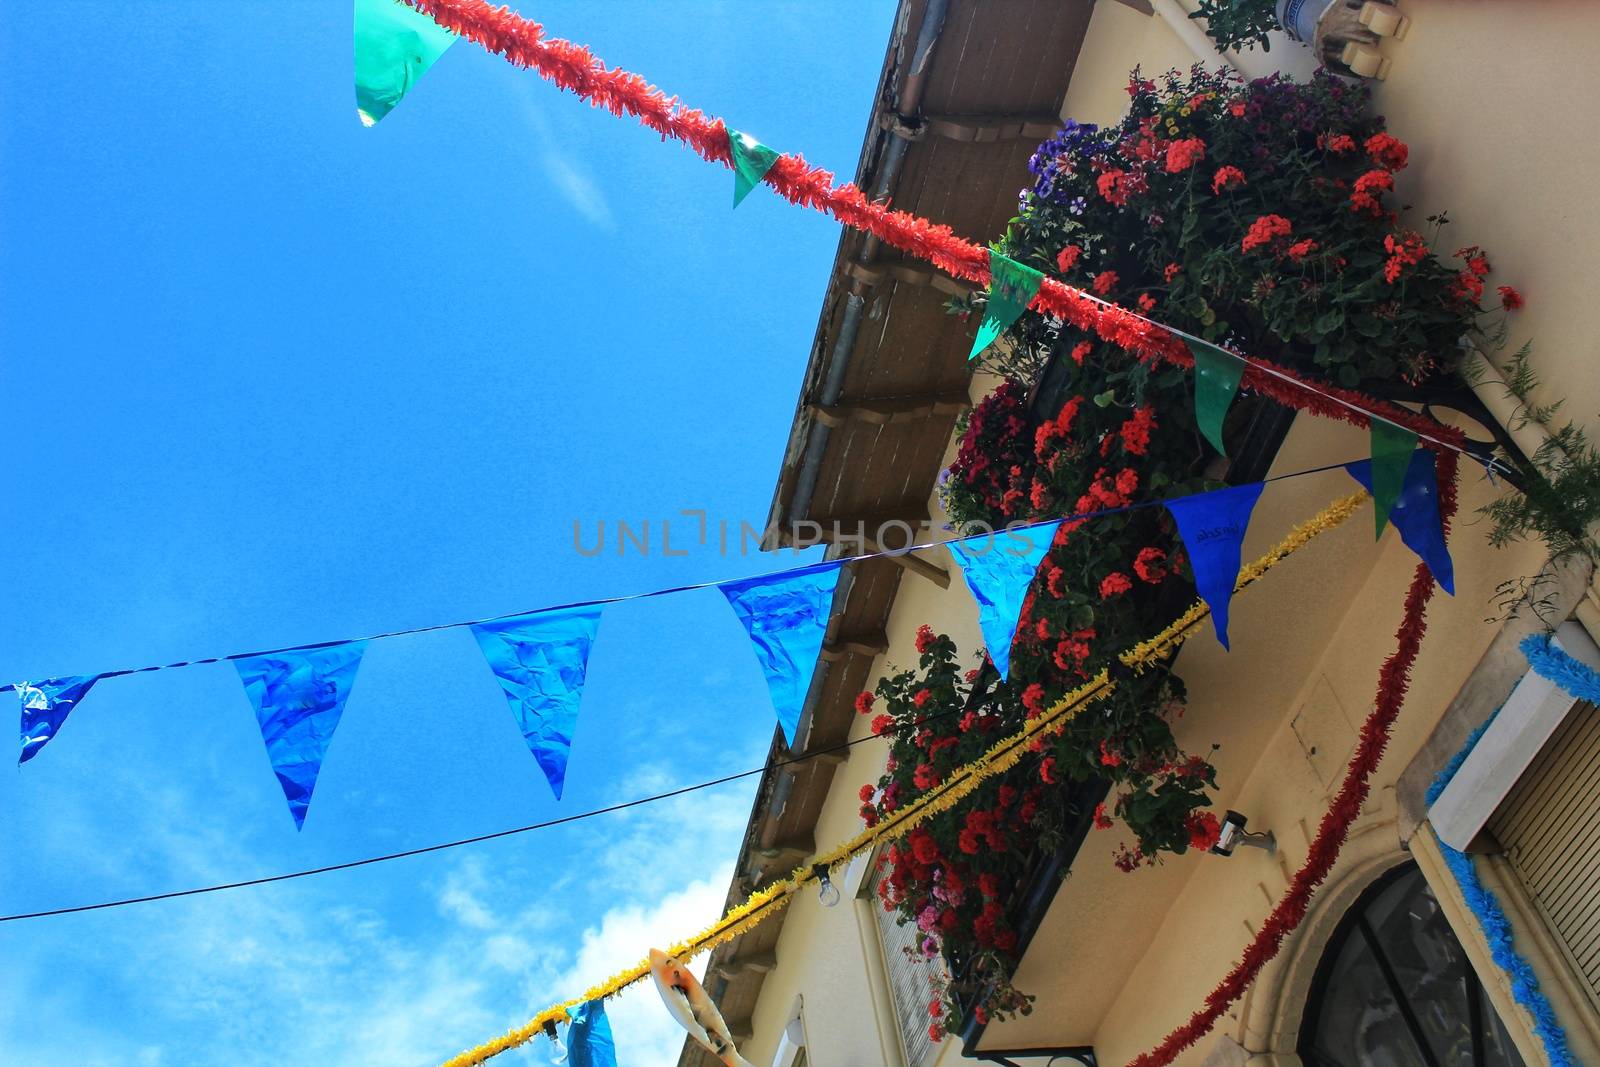 Streets adorned with garlands in Alfama, Lisbon by soniabonet